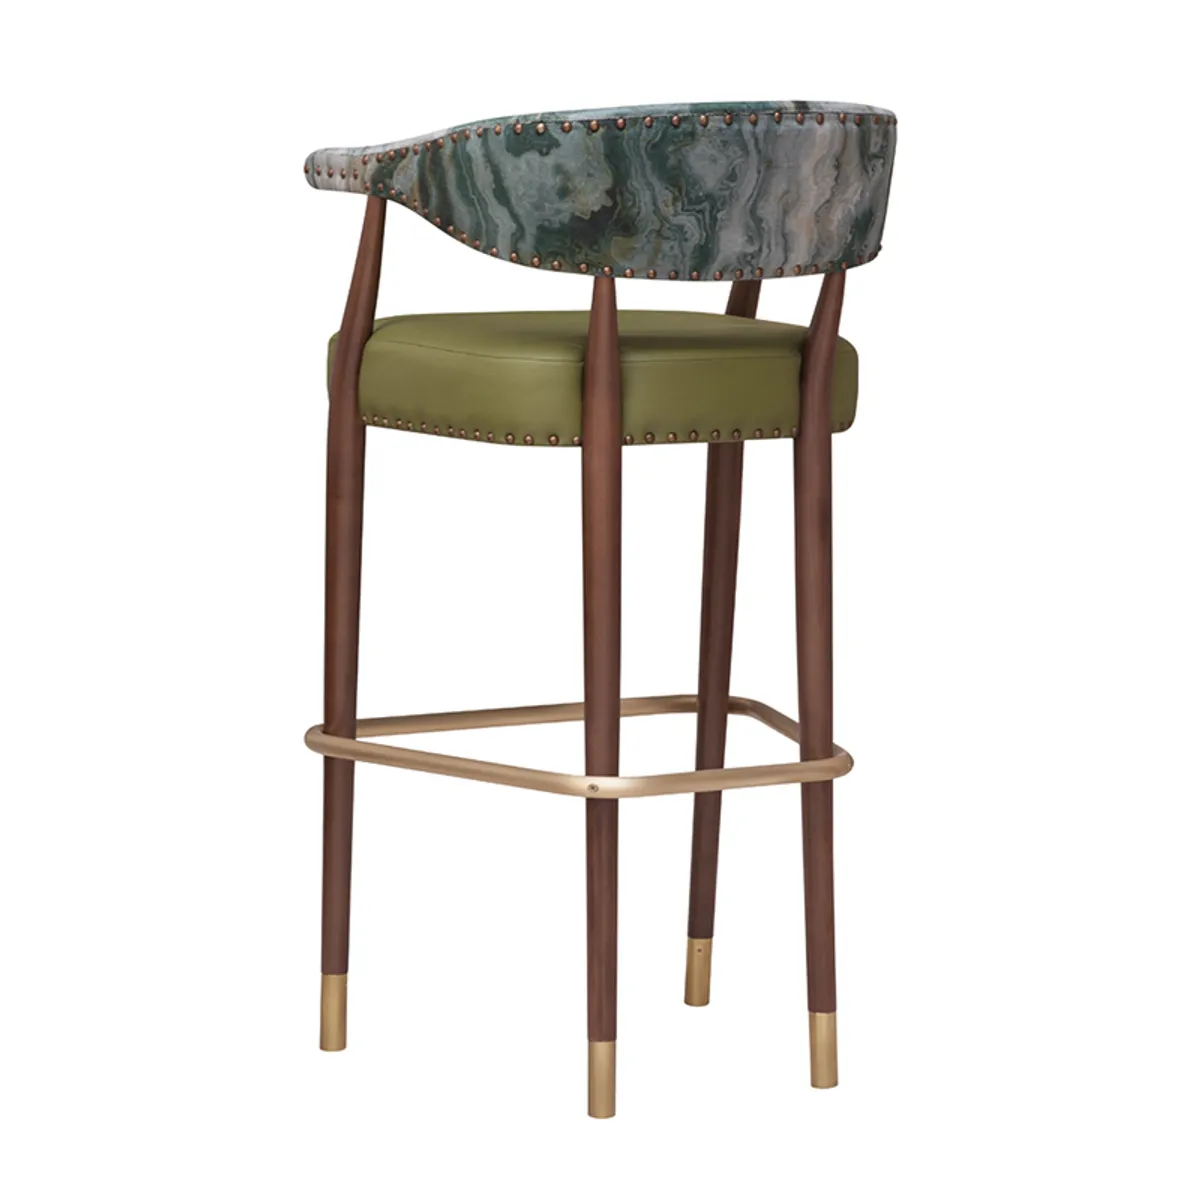 Clara Bar Stool Furniture For Bars With Stud Detailing And Metal Slipper Cups On Wooden Legs 0986